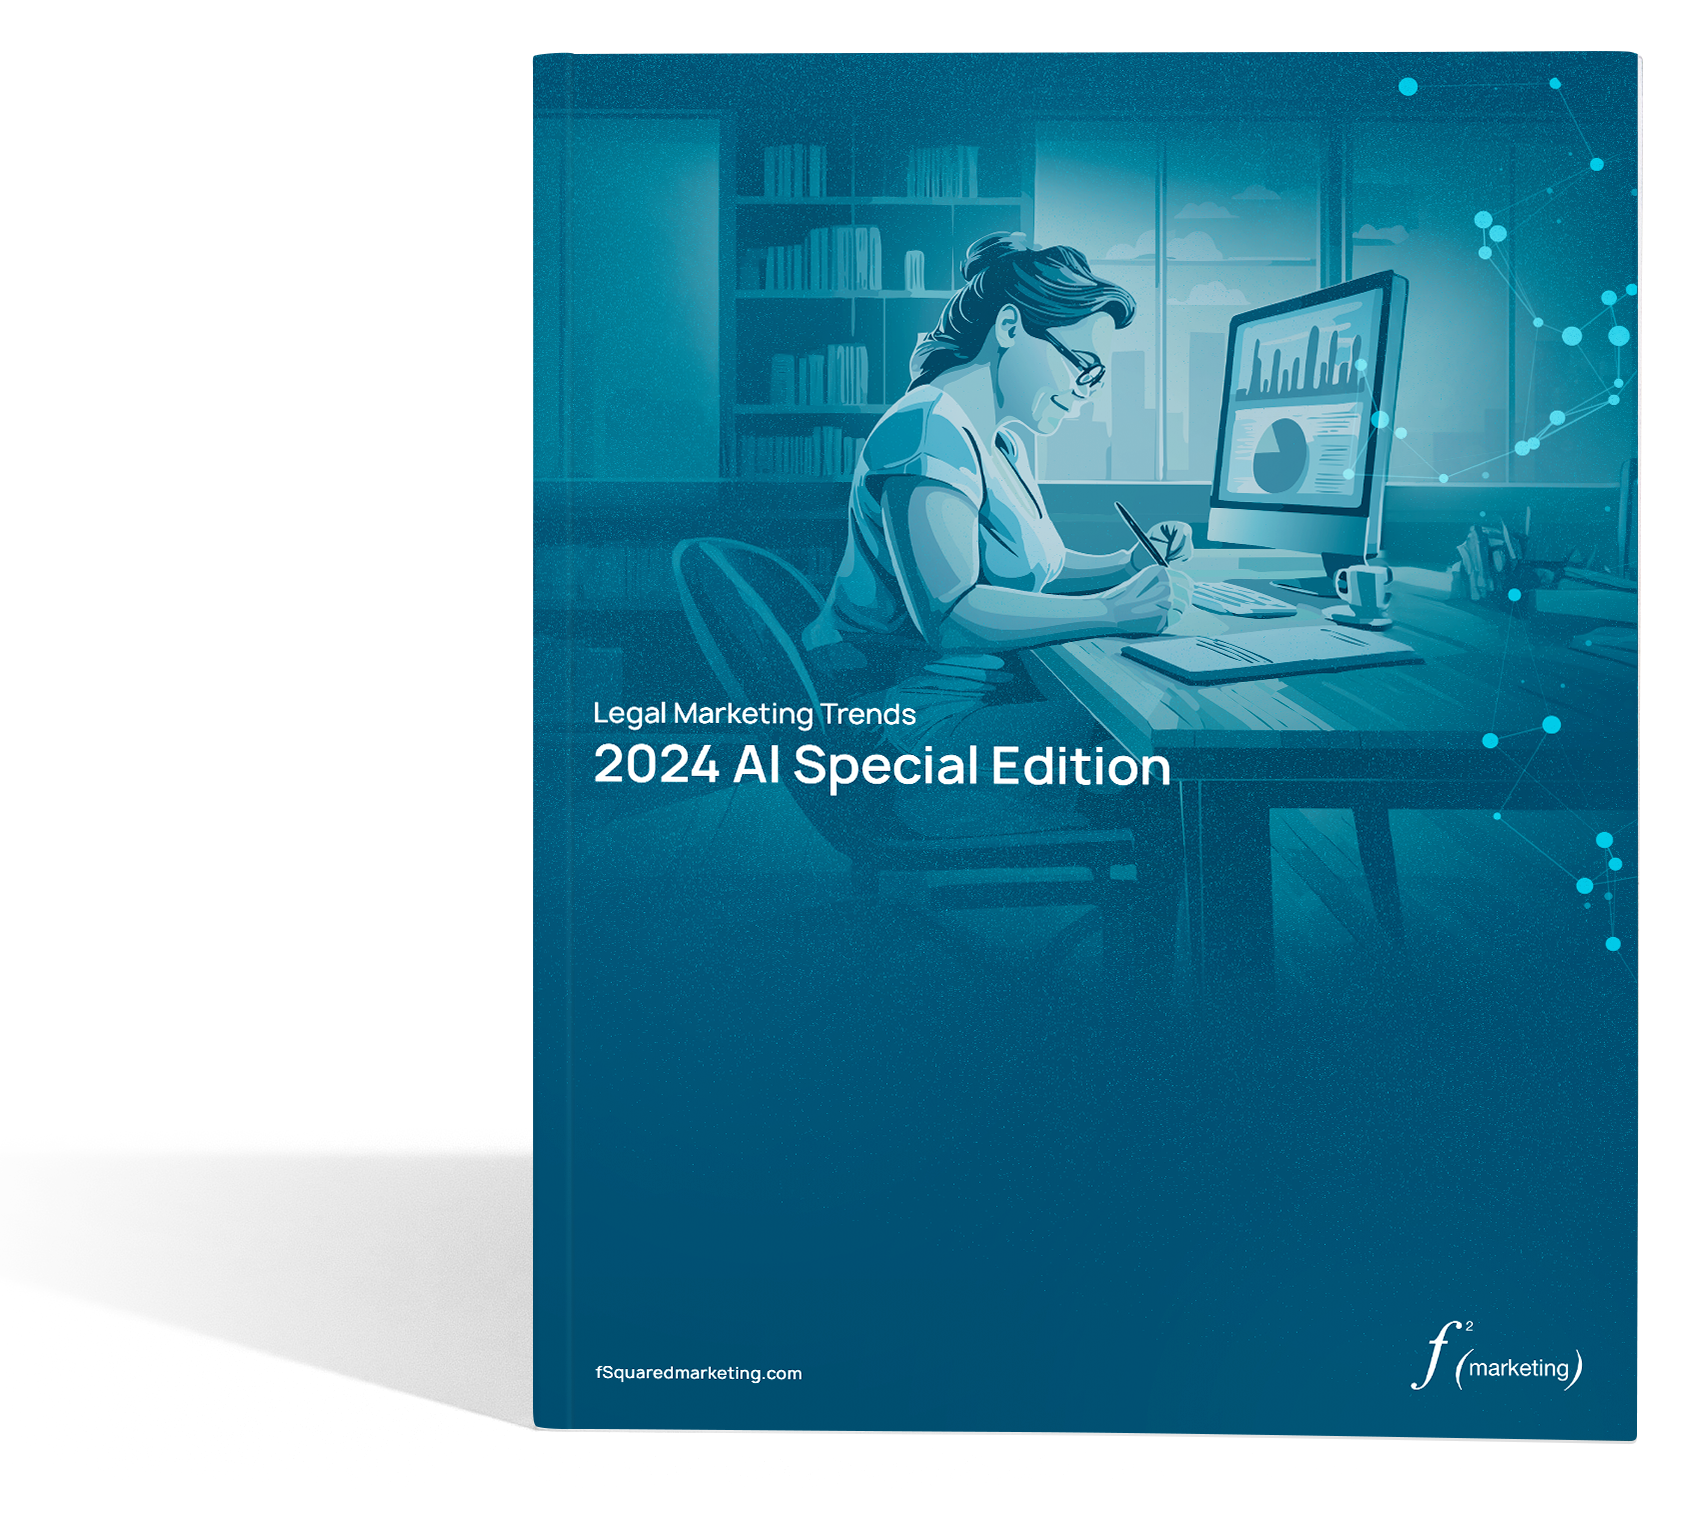 Legal Marketing Trends 2024 - AI Special Edition front cover